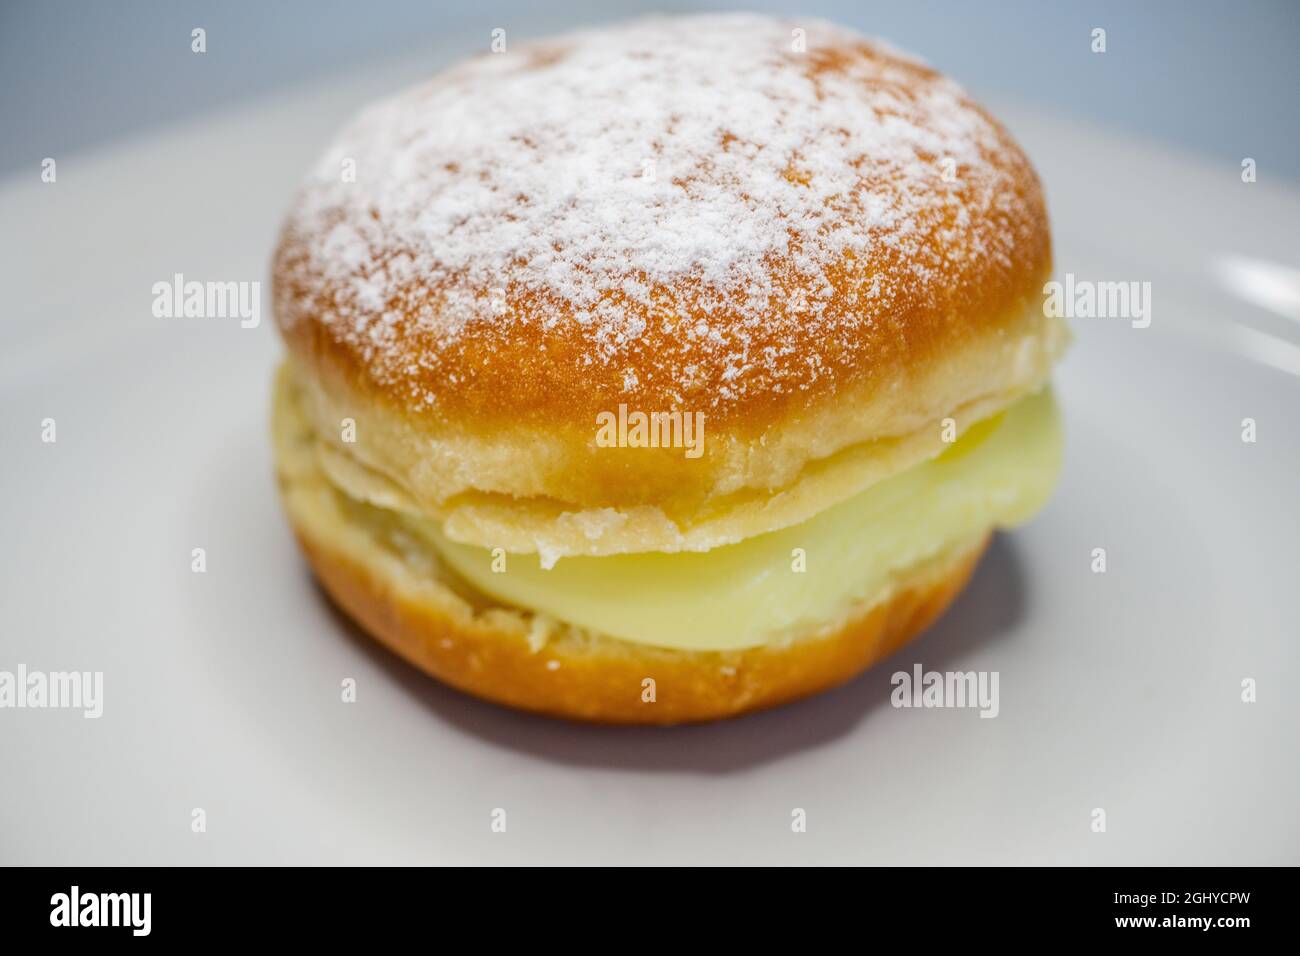 close up of berliner pastry on a white plate - german pastry dish with vanilla cream filling Stock Photo